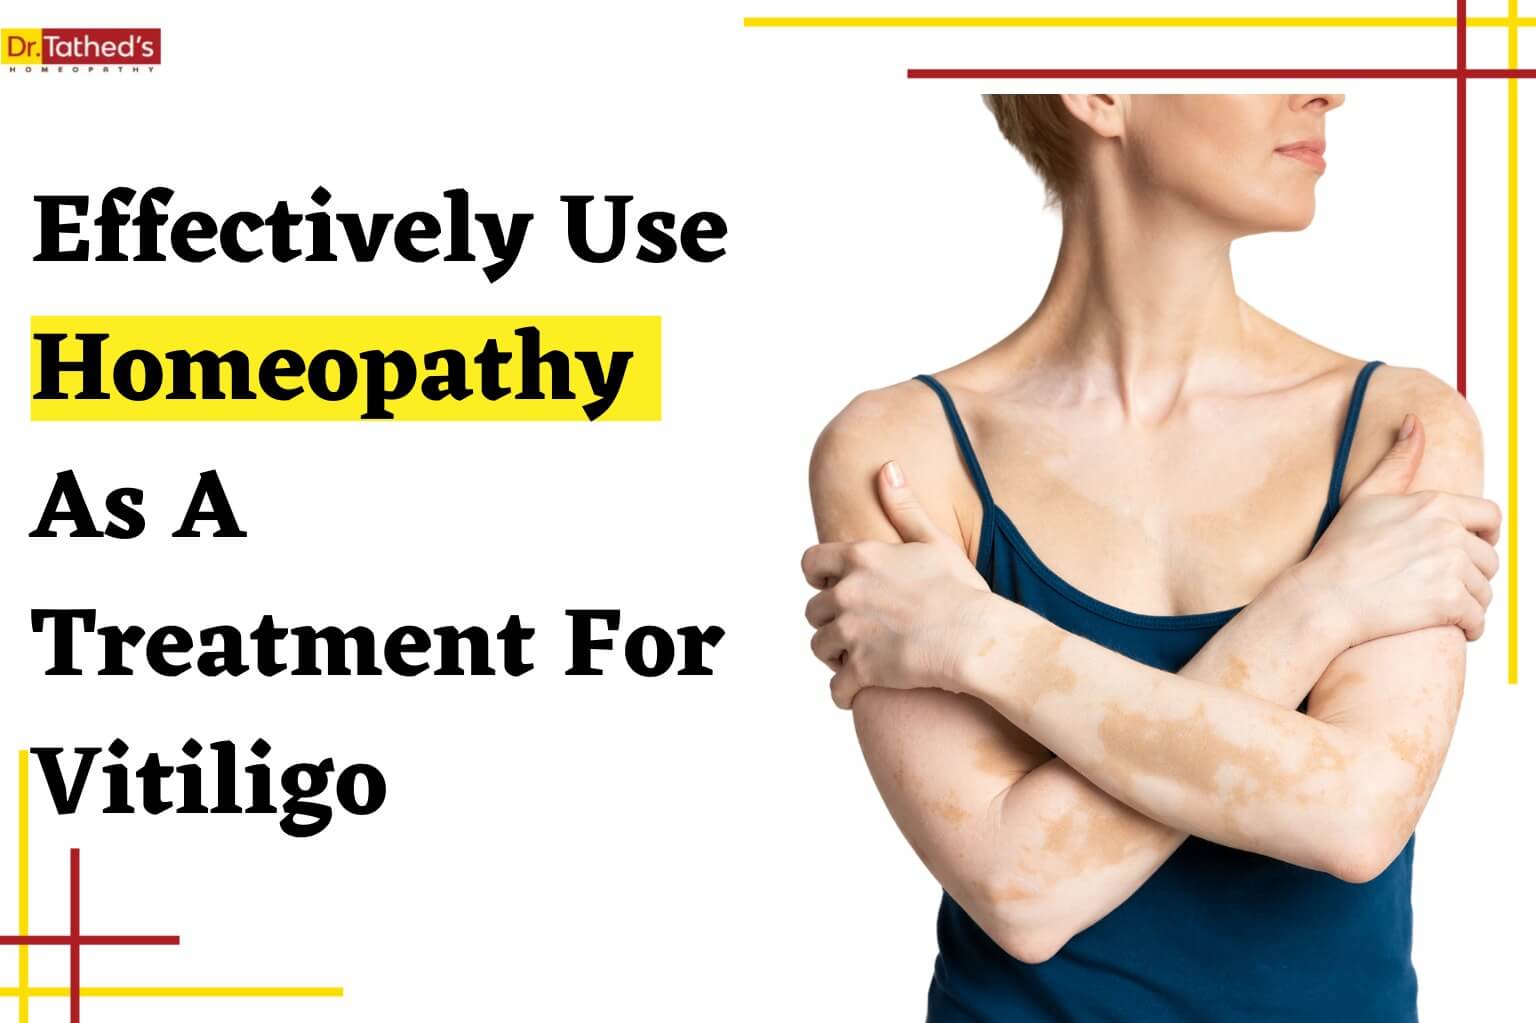 How To Effectively Use Homeopathy As A Treatment For Vitiligo